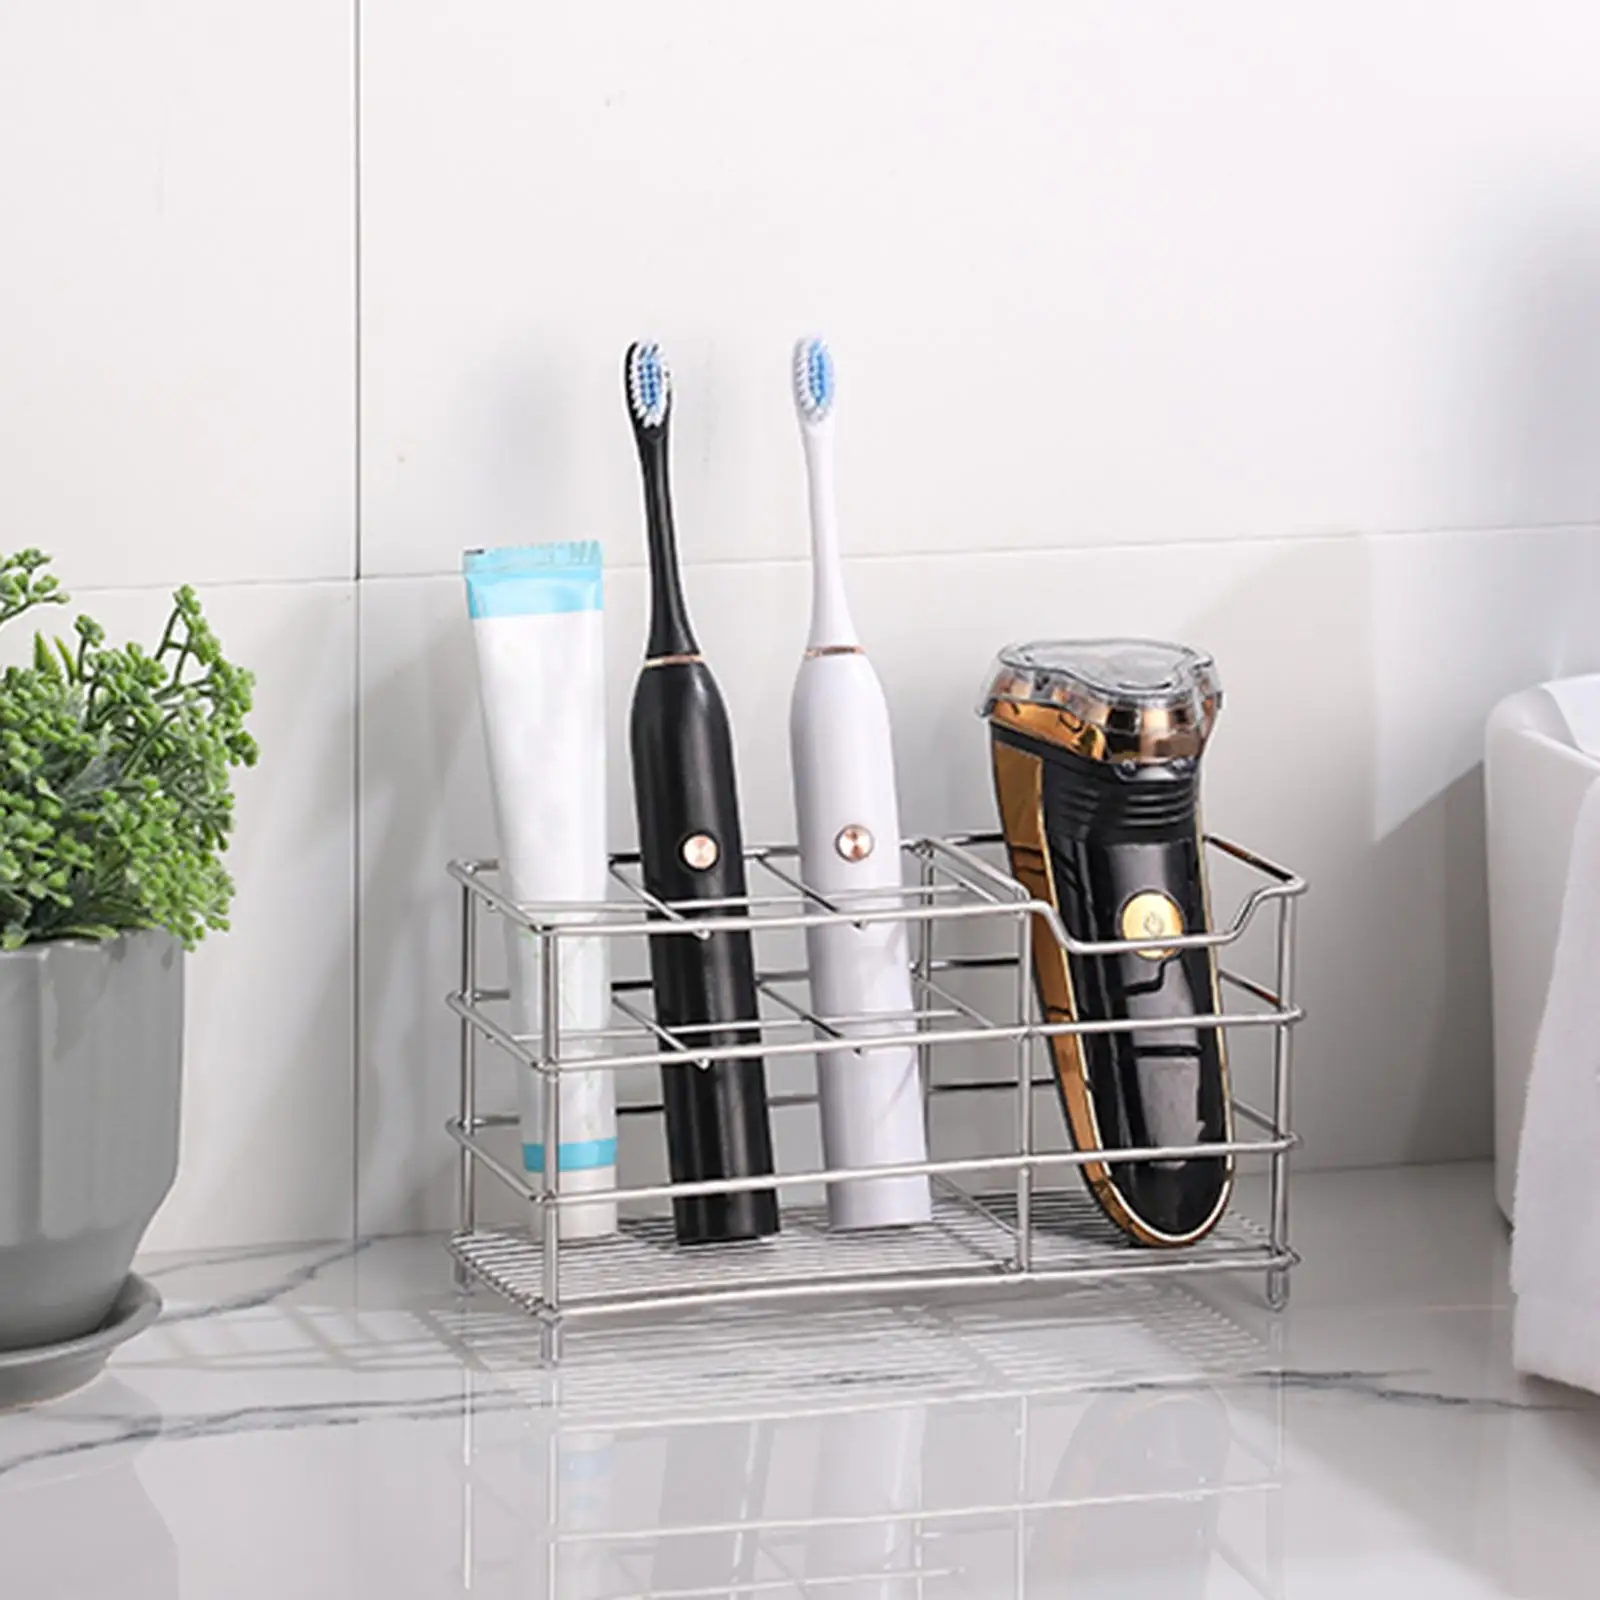 Toothbrush Holder Electric Toothbrush Stand Organizer Bathroom Accessories